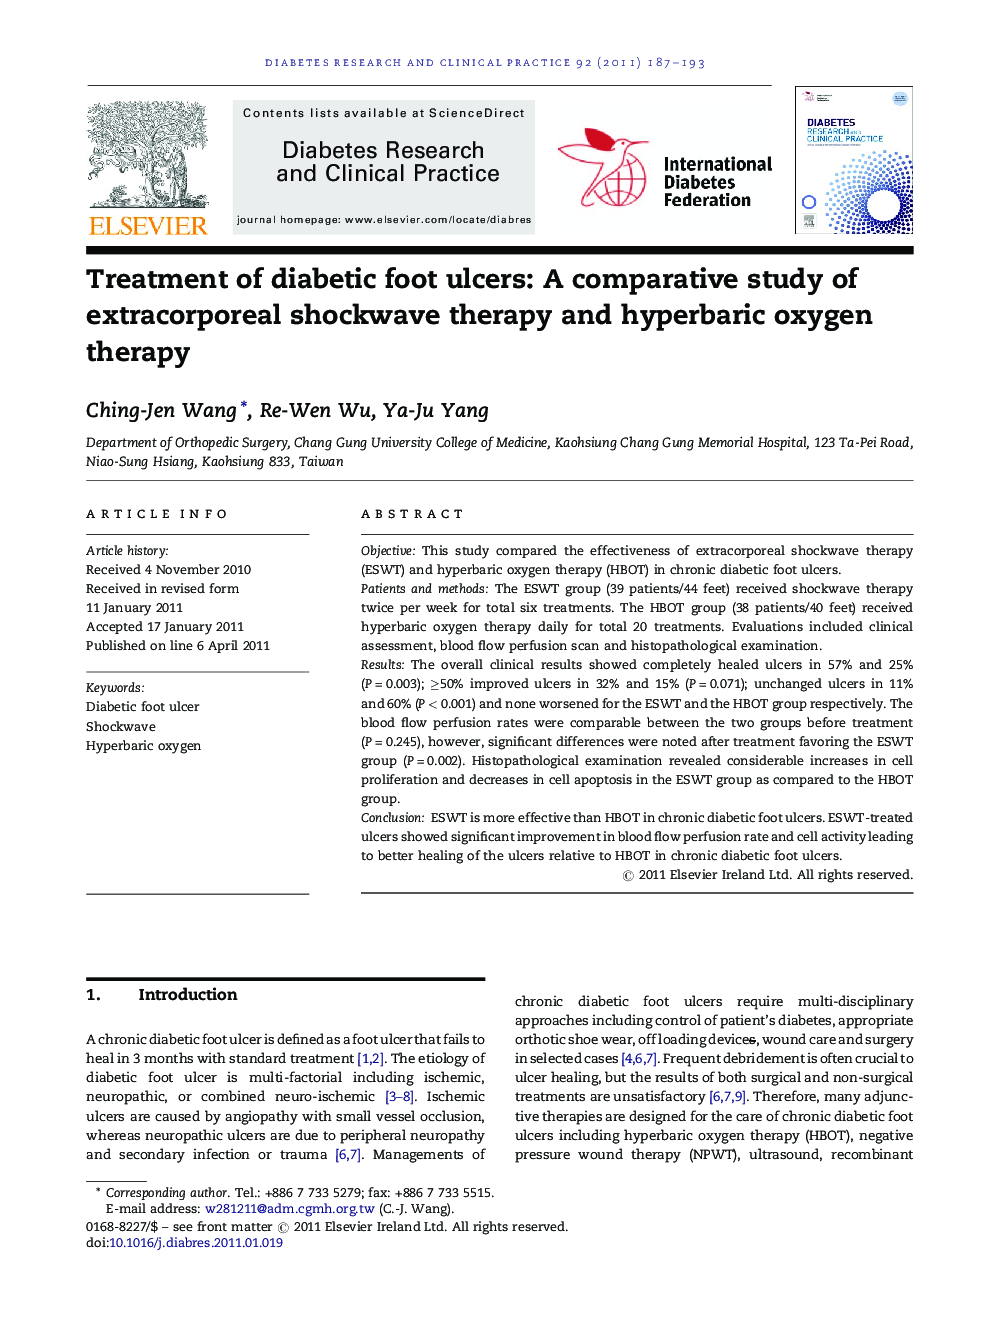 Treatment of diabetic foot ulcers: A comparative study of extracorporeal shockwave therapy and hyperbaric oxygen therapy